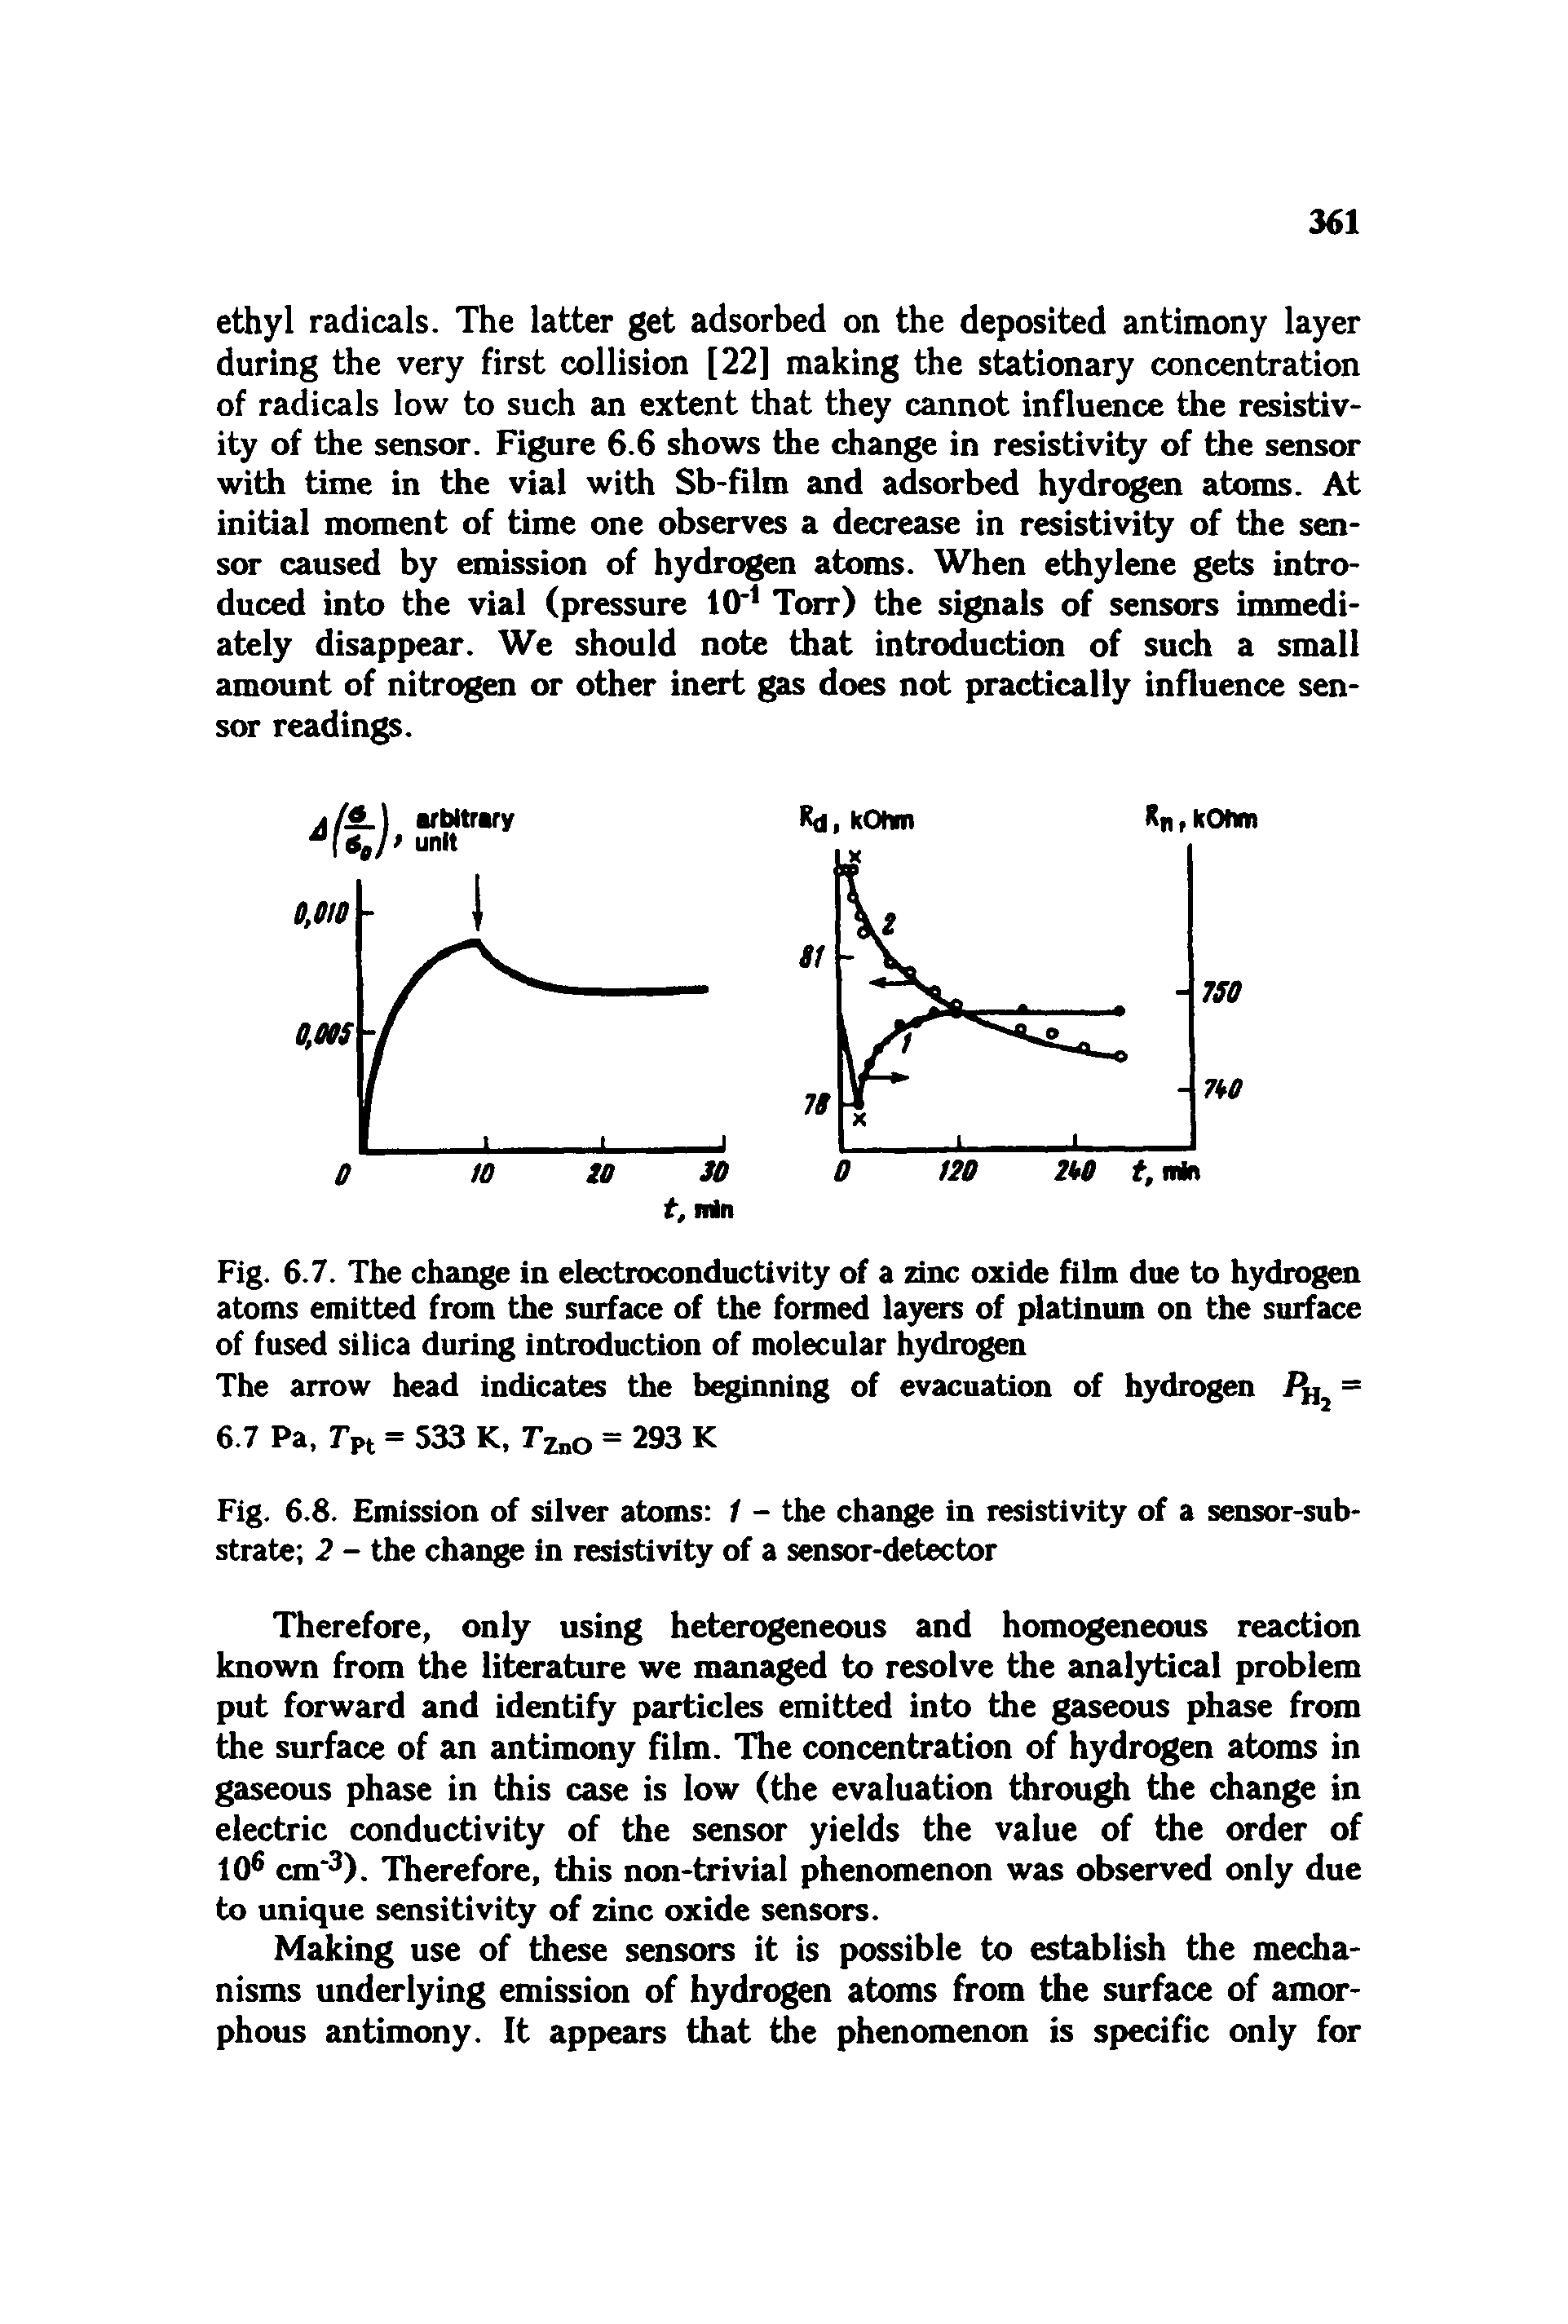 Fig. 6.7. The change in electroconductivity of a zinc oxide film due to hydrogen atoms emitted from the surface of the formed layers of platinum on the surface of fused silica during introduction of molecular hydrogen The arrow head indicates the beginning of evacuation of hydrogen...